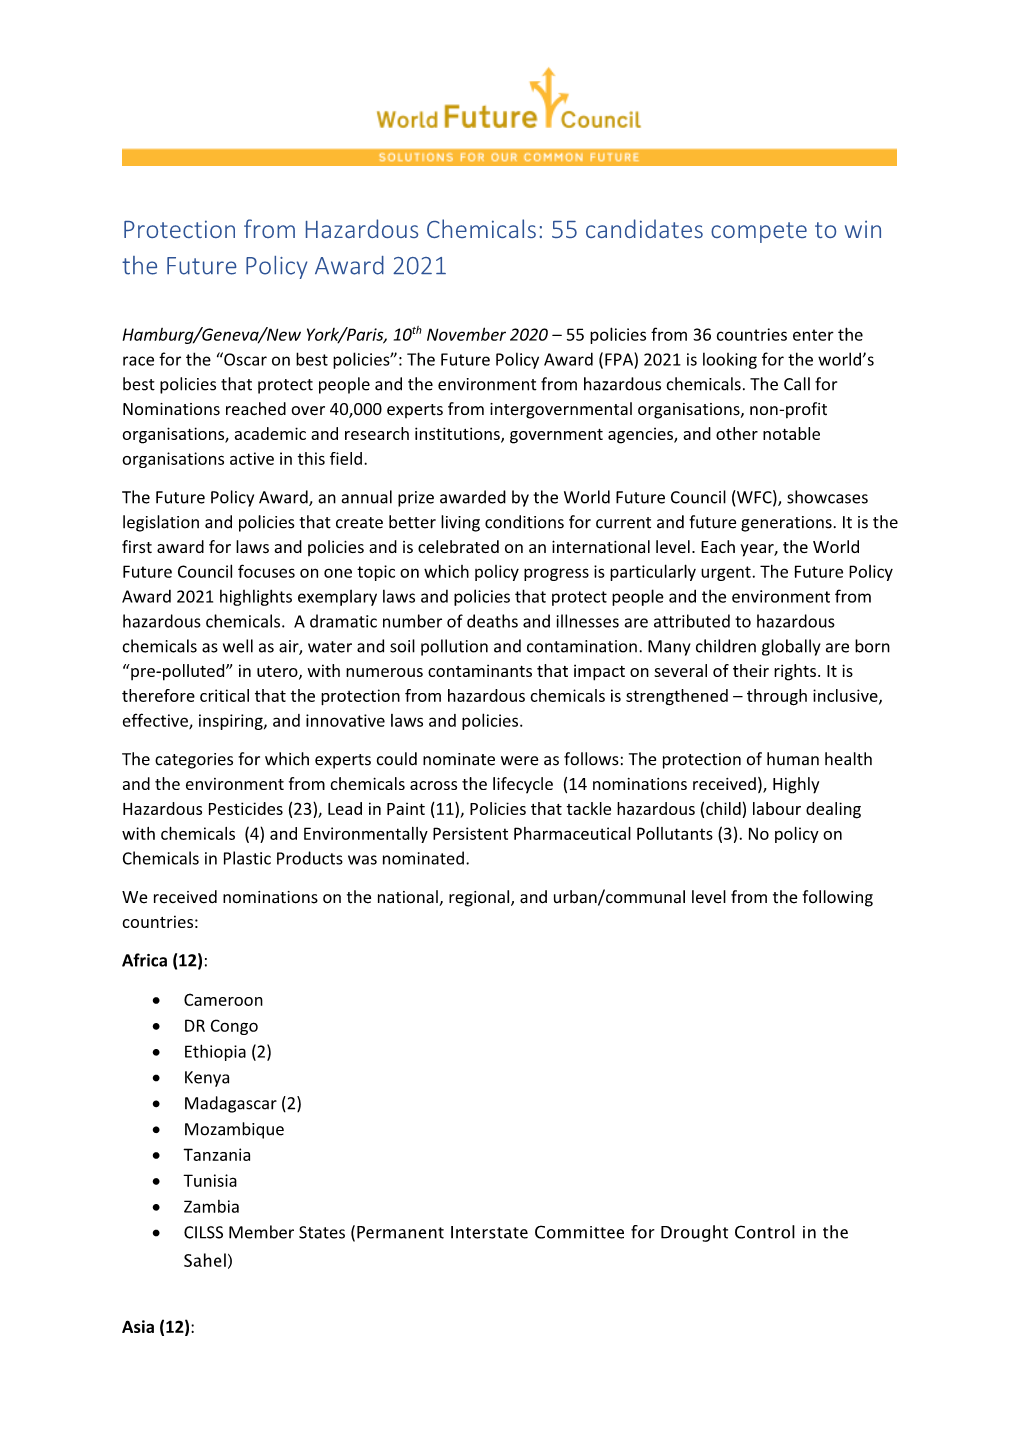 Protection from Hazardous Chemicals: 55 Candidates Compete to Win the Future Policy Award 2021